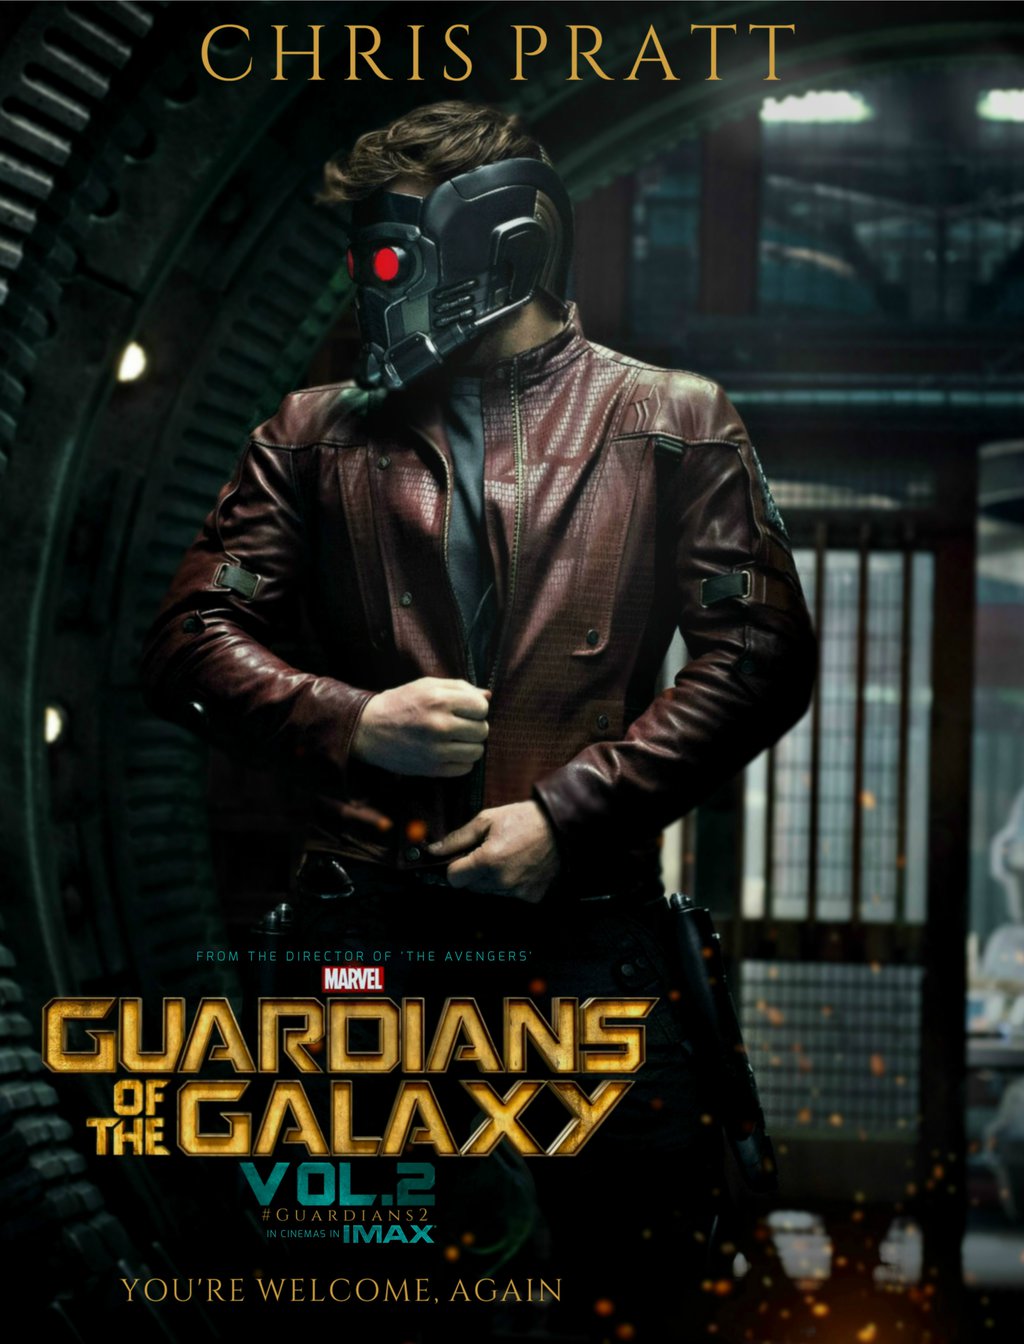 guardians_of_the_galaxy_vol_2___star_lord_poster_by_noplanes-d9xxb0h.jpg